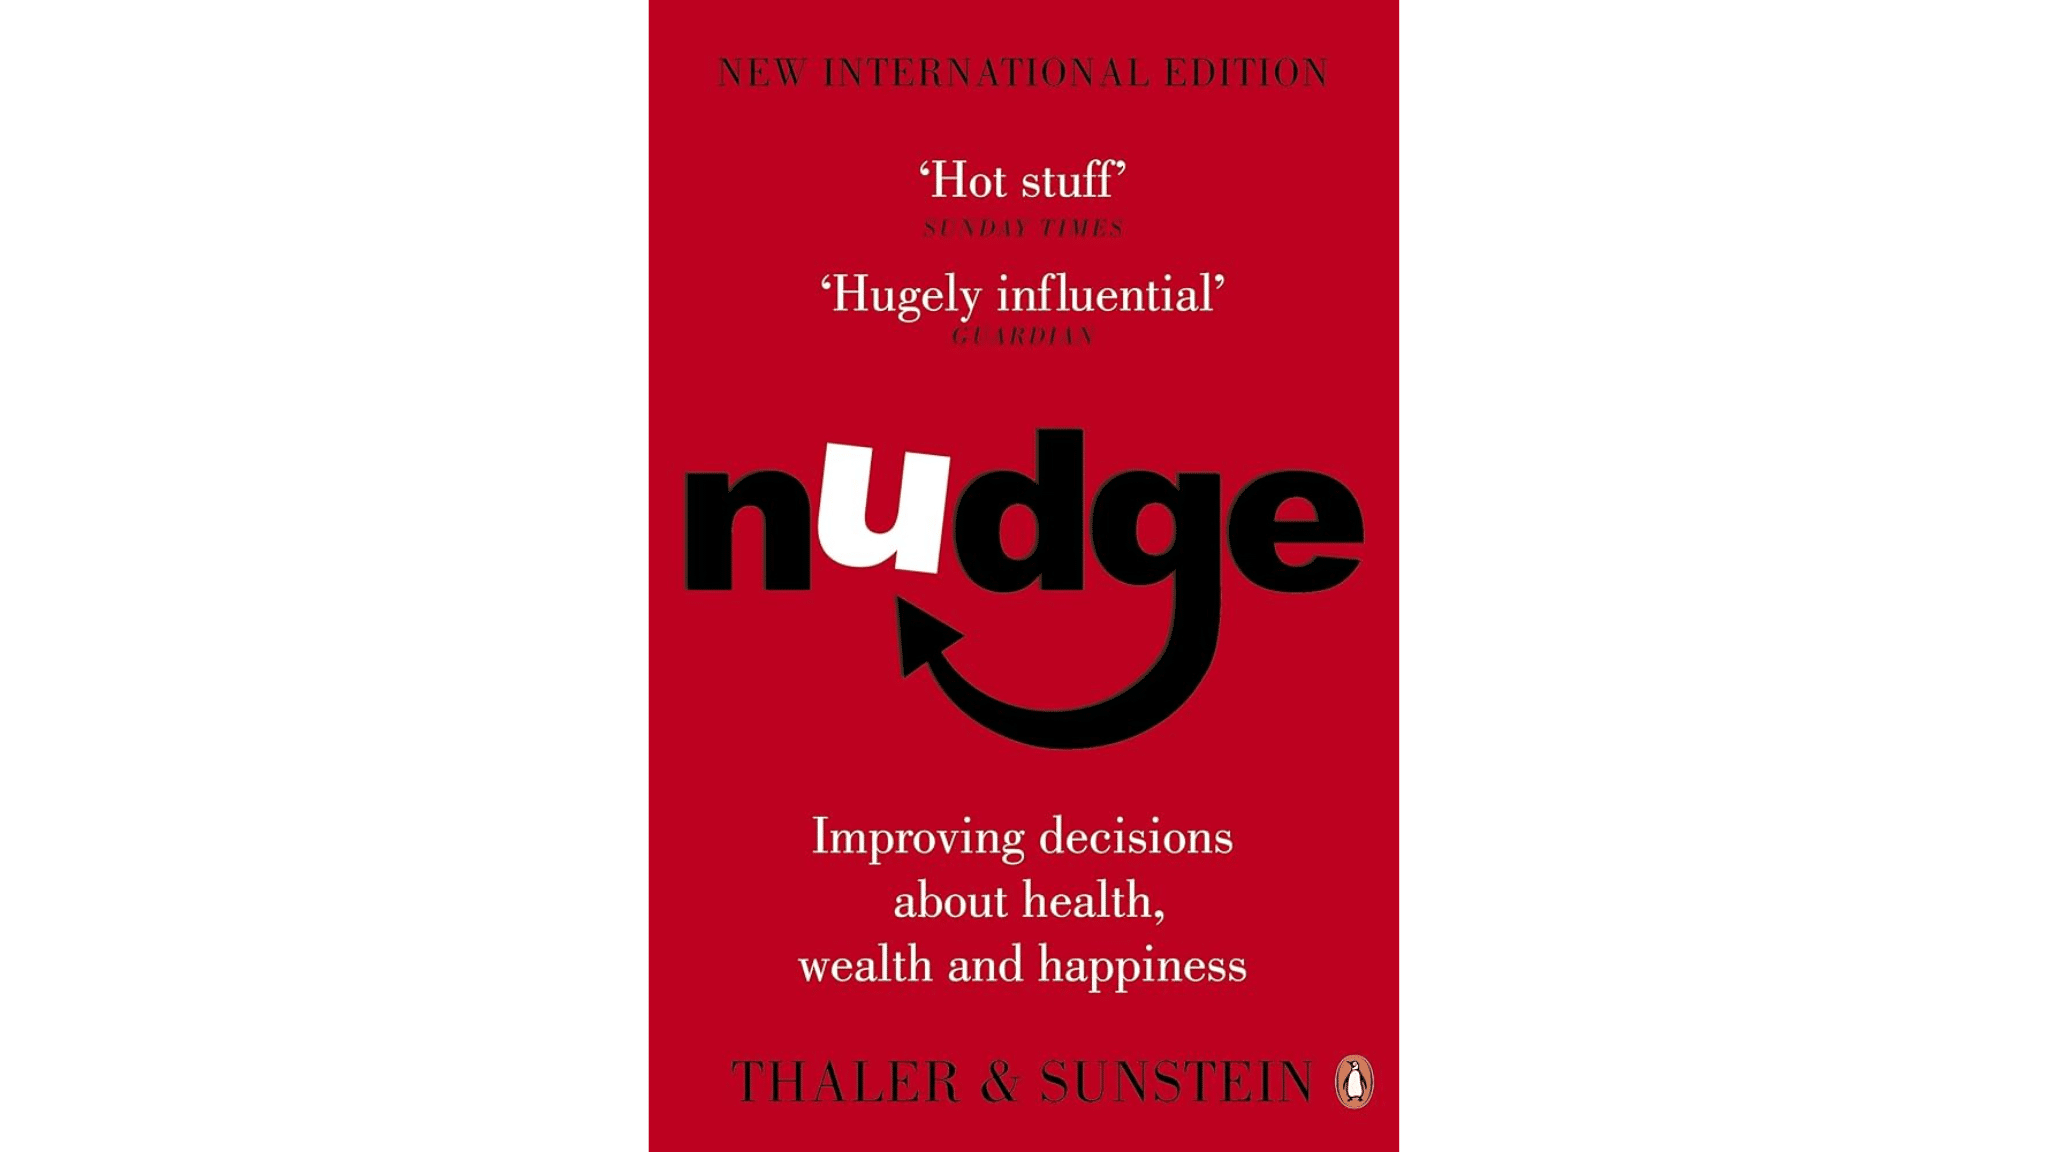 nudge book review